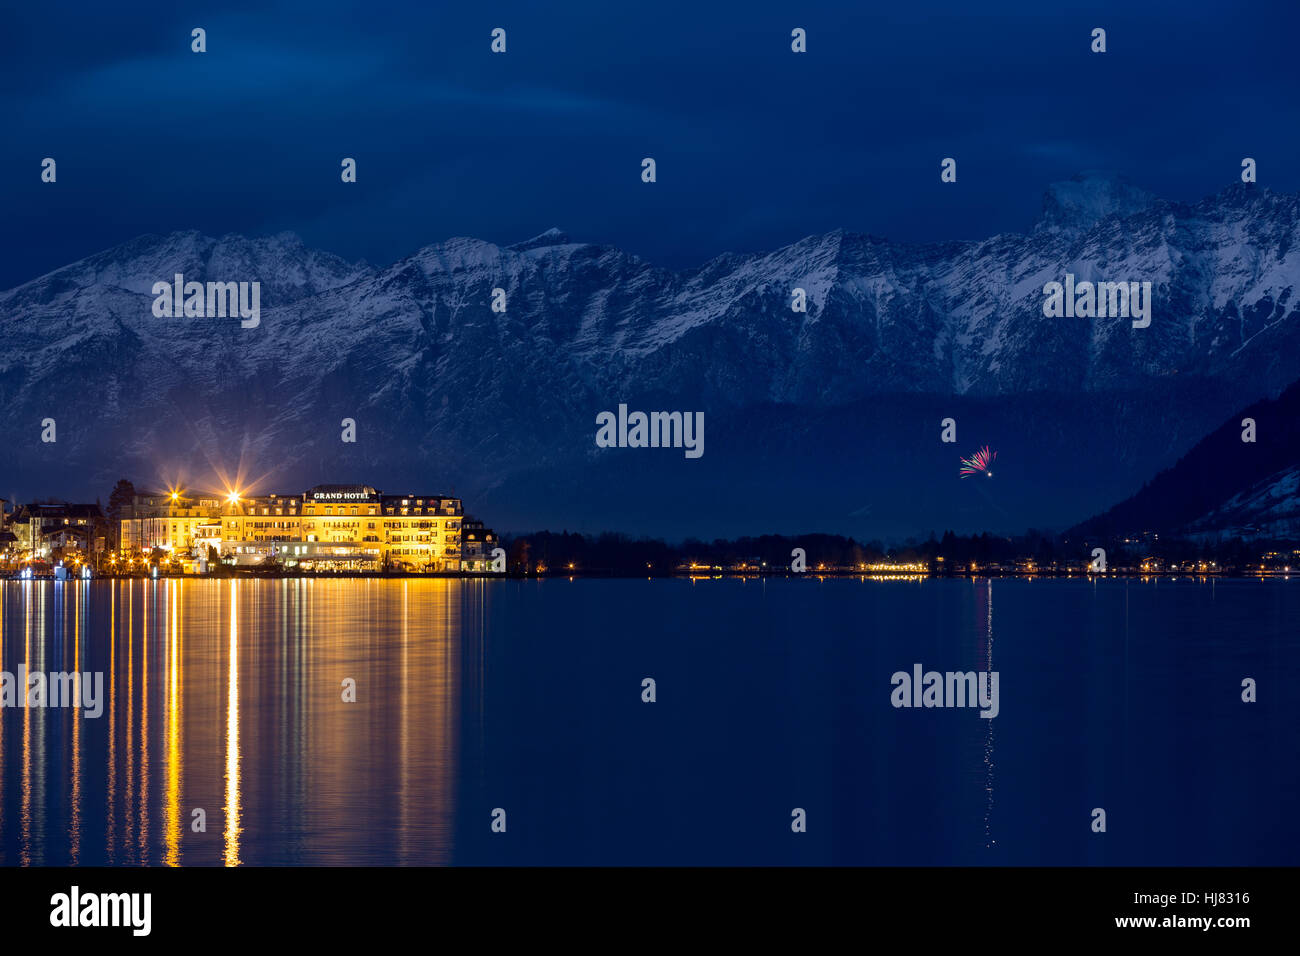 ZELL AM SEE, AUSTRIA - JANUARY 05, 2016 - Grand Hotel in front of Steinernes Meer ('Rocky Sea') mountain range at wintertime Stock Photo